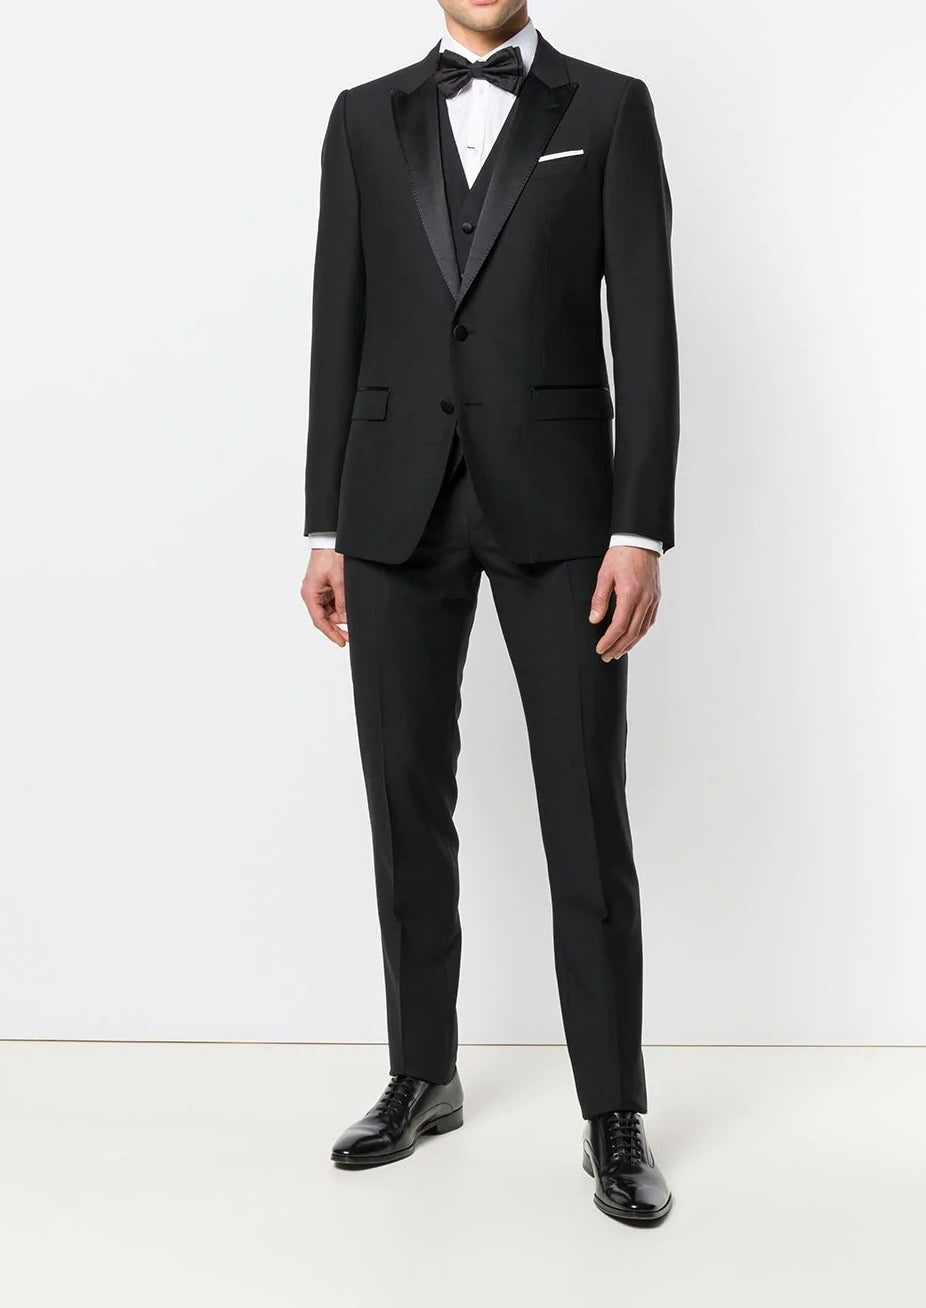 Torre Black Dinner Suit (full outfit) - Top Mark Suits